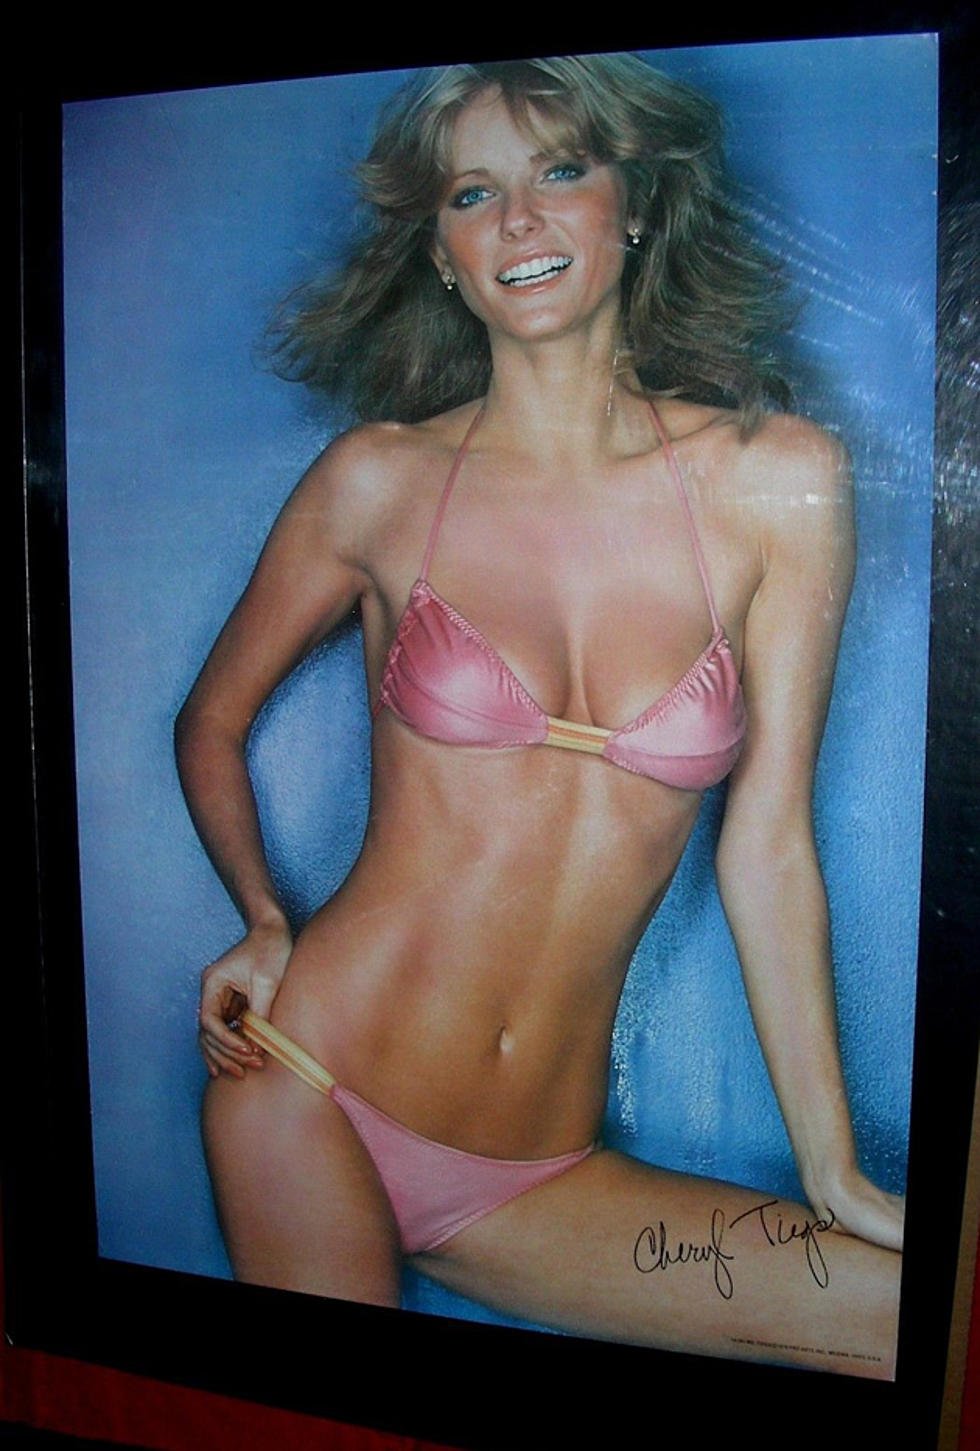 hottest posters of the 70s and 80s